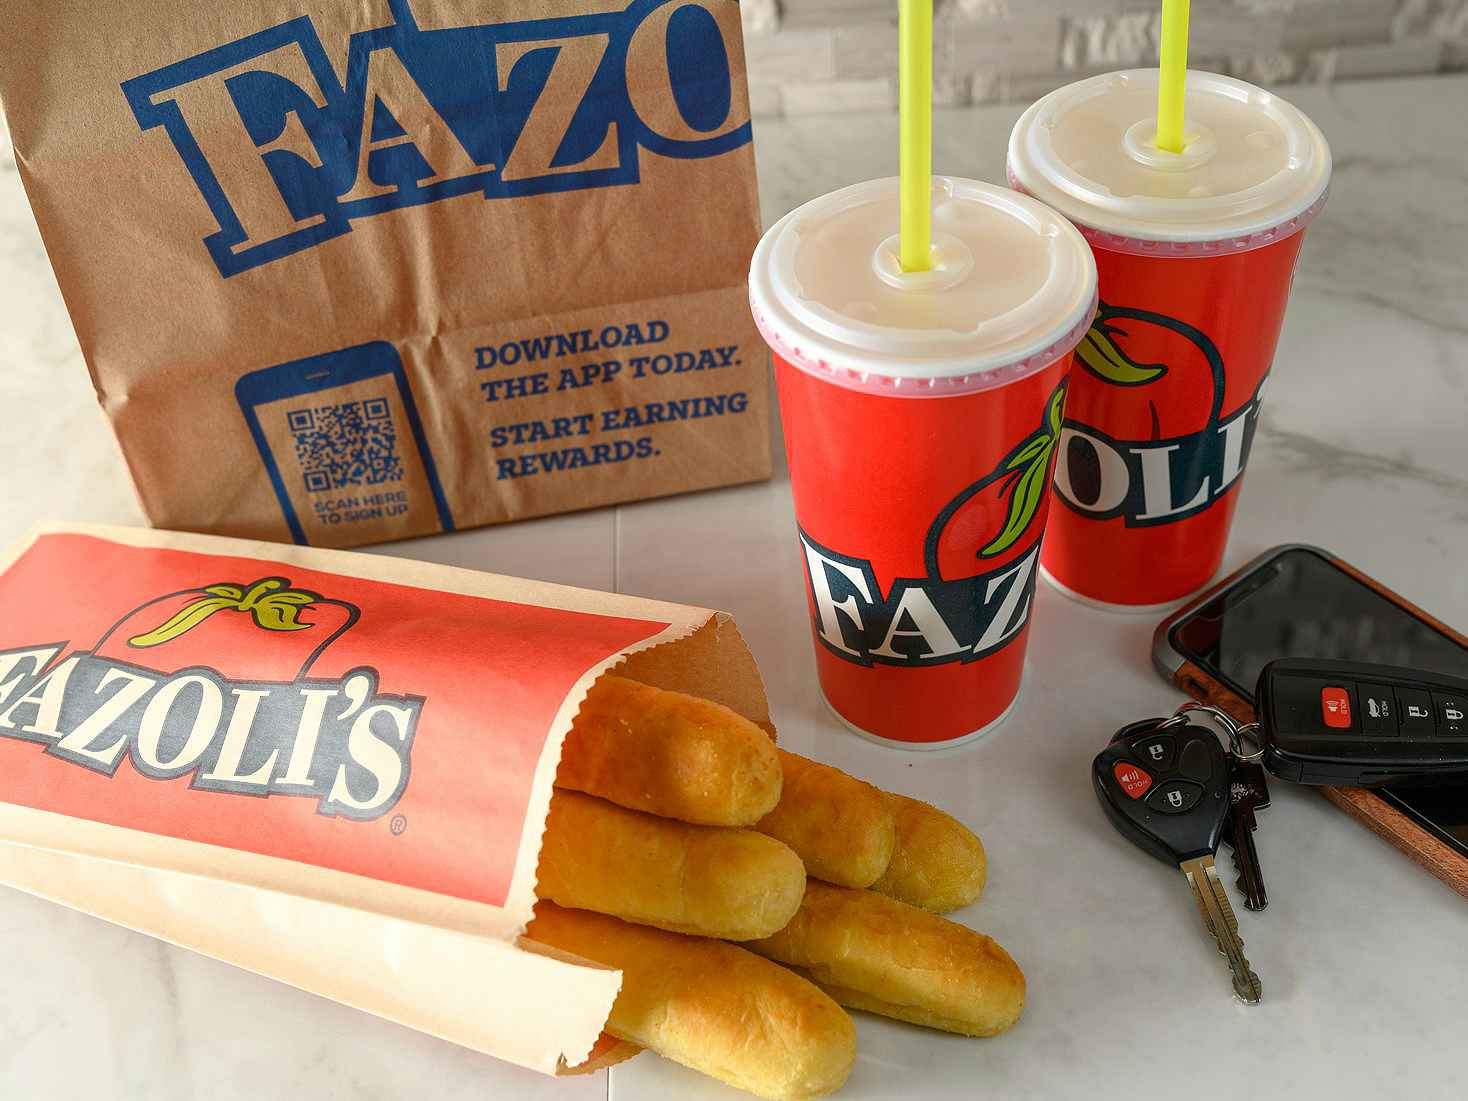 fazolis carry-out bag, breadsticks, drinks, phone, and keys on counter